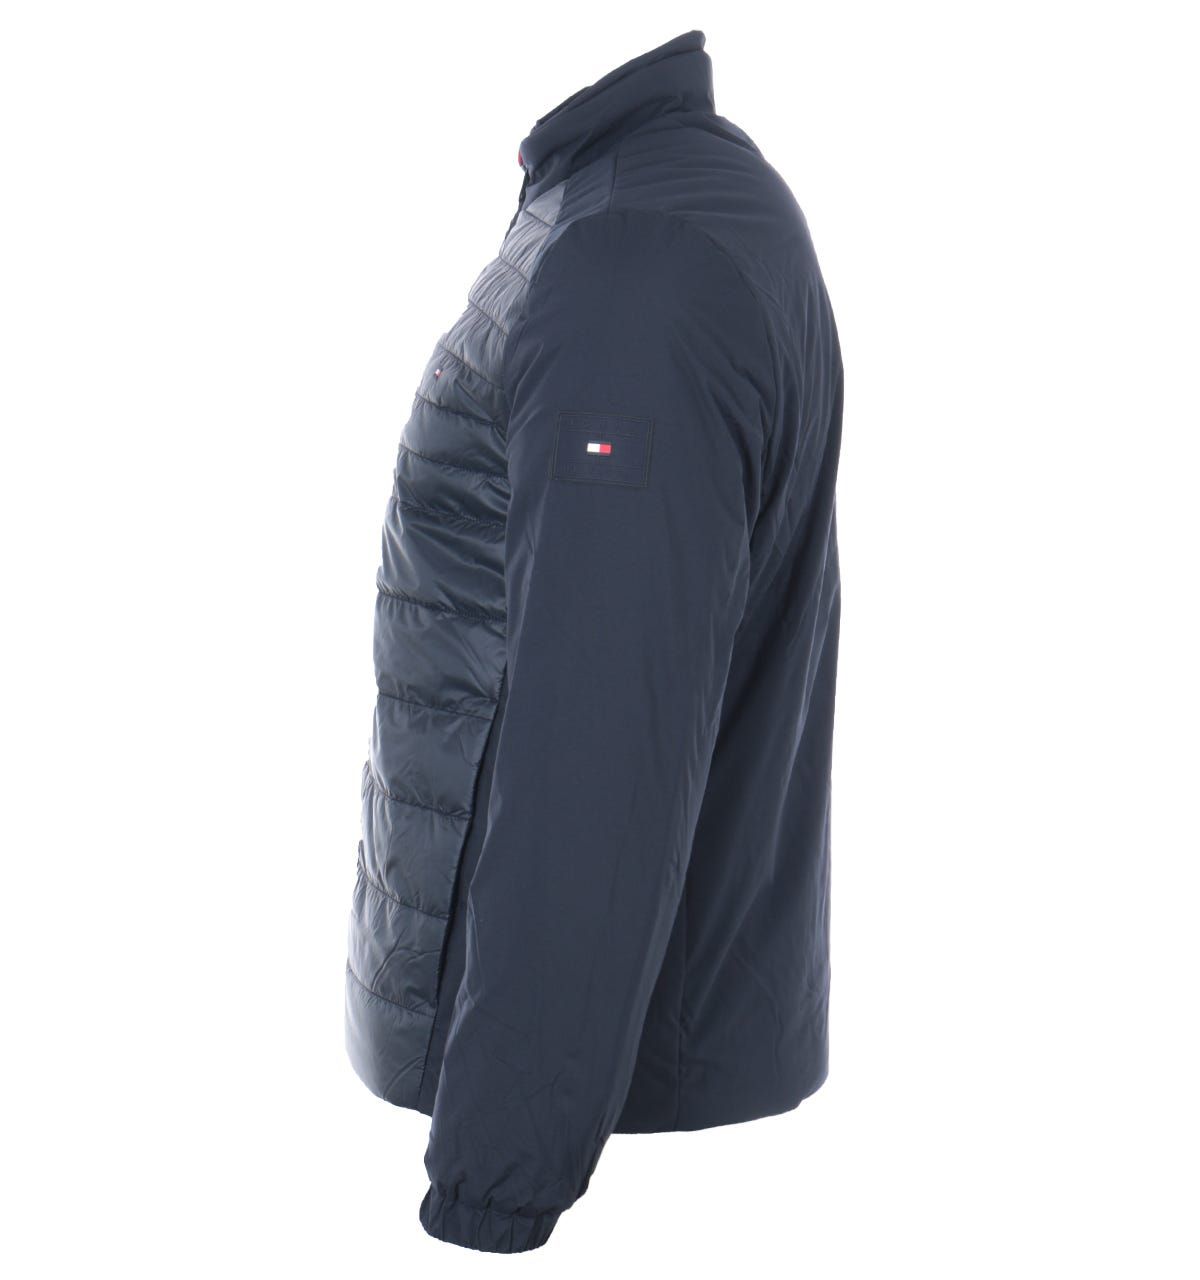 Designed with sustainability and supreme warmth in mind. This lightweight jacket from Tommy Hilfiger is the ideal piece to refresh your outerwear this season. Crafted from recycled polyester using advanced warming technology. Featuring a high neck with a full zip closure, zip chest pocket, snap button front pockets, elasticated cuffs and a quilted front. Finished with the iconic Tommy flag embroidered at the chest and signature stripe detail at the collar. Regular Fit, Recycled Polyester, Warming Technology, High Neck with Full Zip Closure, Quilted Padded Front, Zip Chest Pocket, Twin Front Snap Button Pockets, Elasticated Cuffs, Tommy Hilfiger Branding. Style & Fit:Regular Fit, Fits True to Size. Composition & Care:100% Recycled Polyester, Machine Wash.